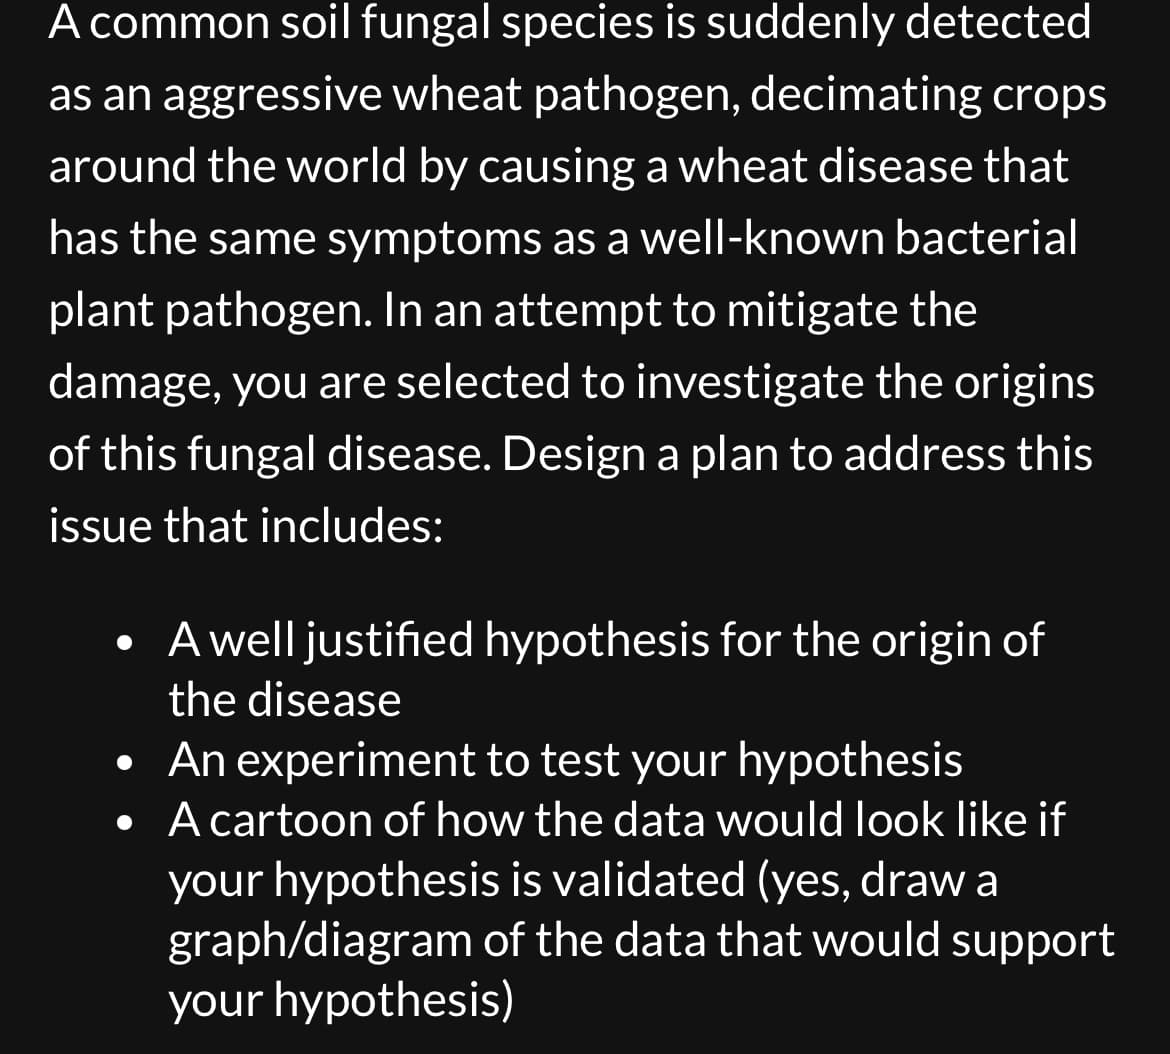 A common soil fungal species is suddenly detected
as an aggressive wheat pathogen, decimating crops
around the world by causing a wheat disease that
has the same symptoms as a well-known bacterial
plant pathogen. In an attempt to mitigate the
damage, you are selected to investigate the origins
of this fungal disease. Design a plan to address this
issue that includes:
A well justified hypothesis for the origin of
the disease
• An experiment to test your hypothesis
•
A cartoon of how the data would look like if
your hypothesis is validated (yes, draw a
graph/diagram of the data that would support
your hypothesis)